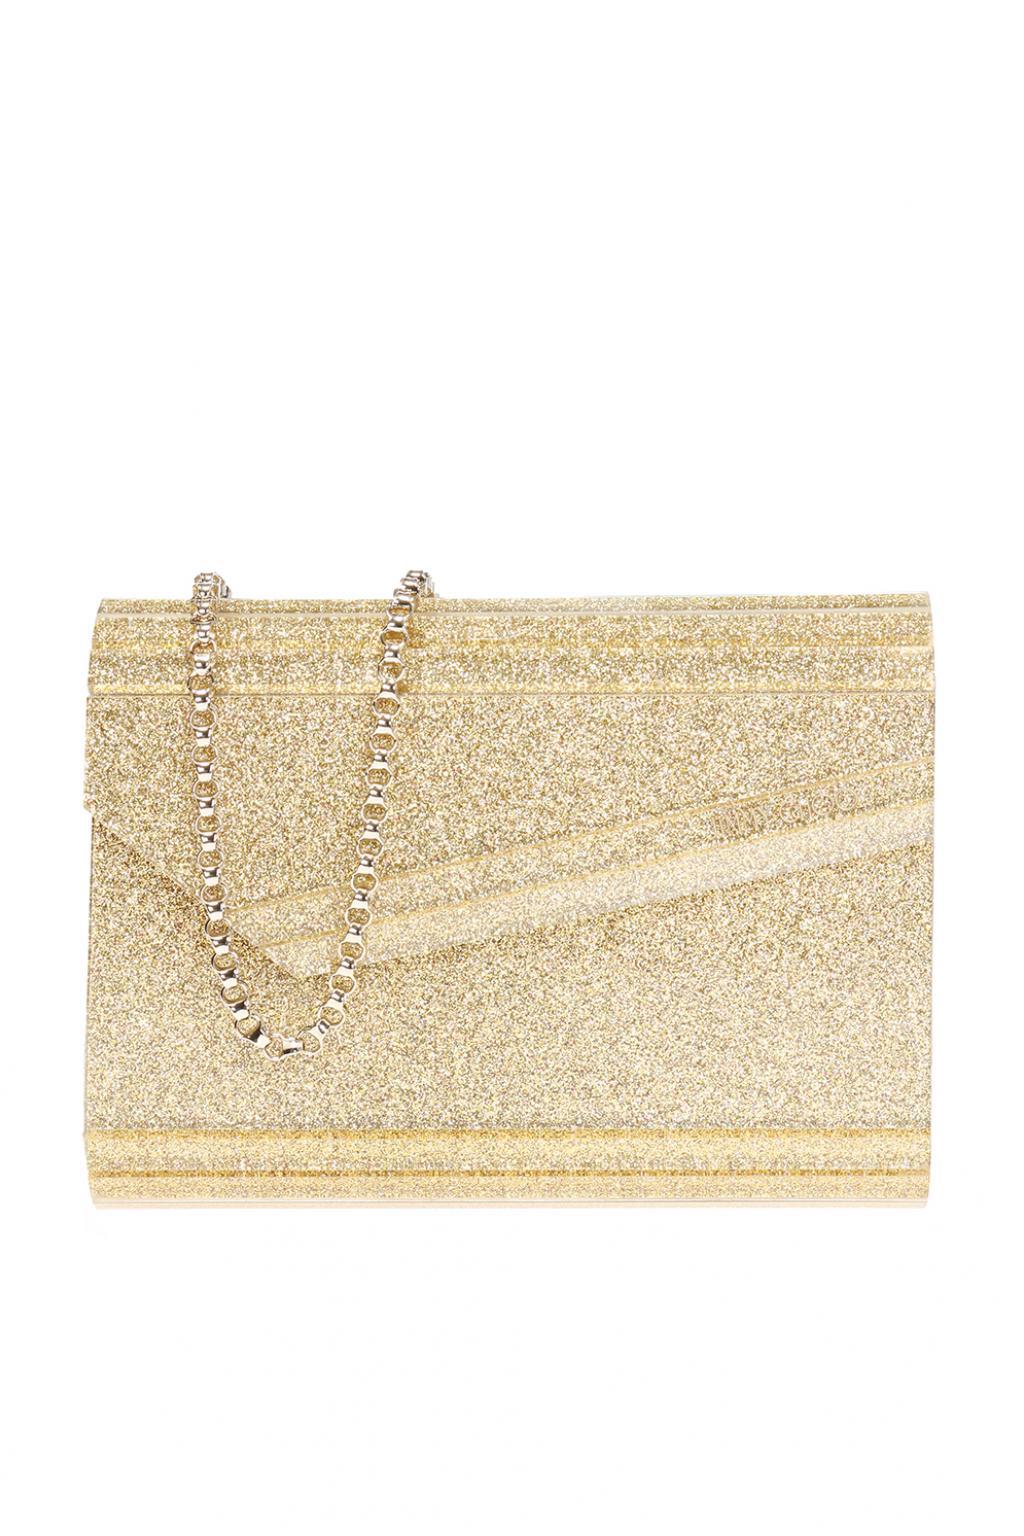 Jimmy Choo Synthetic 'candy' Shoulder Bag in Gold (Metallic) - Lyst